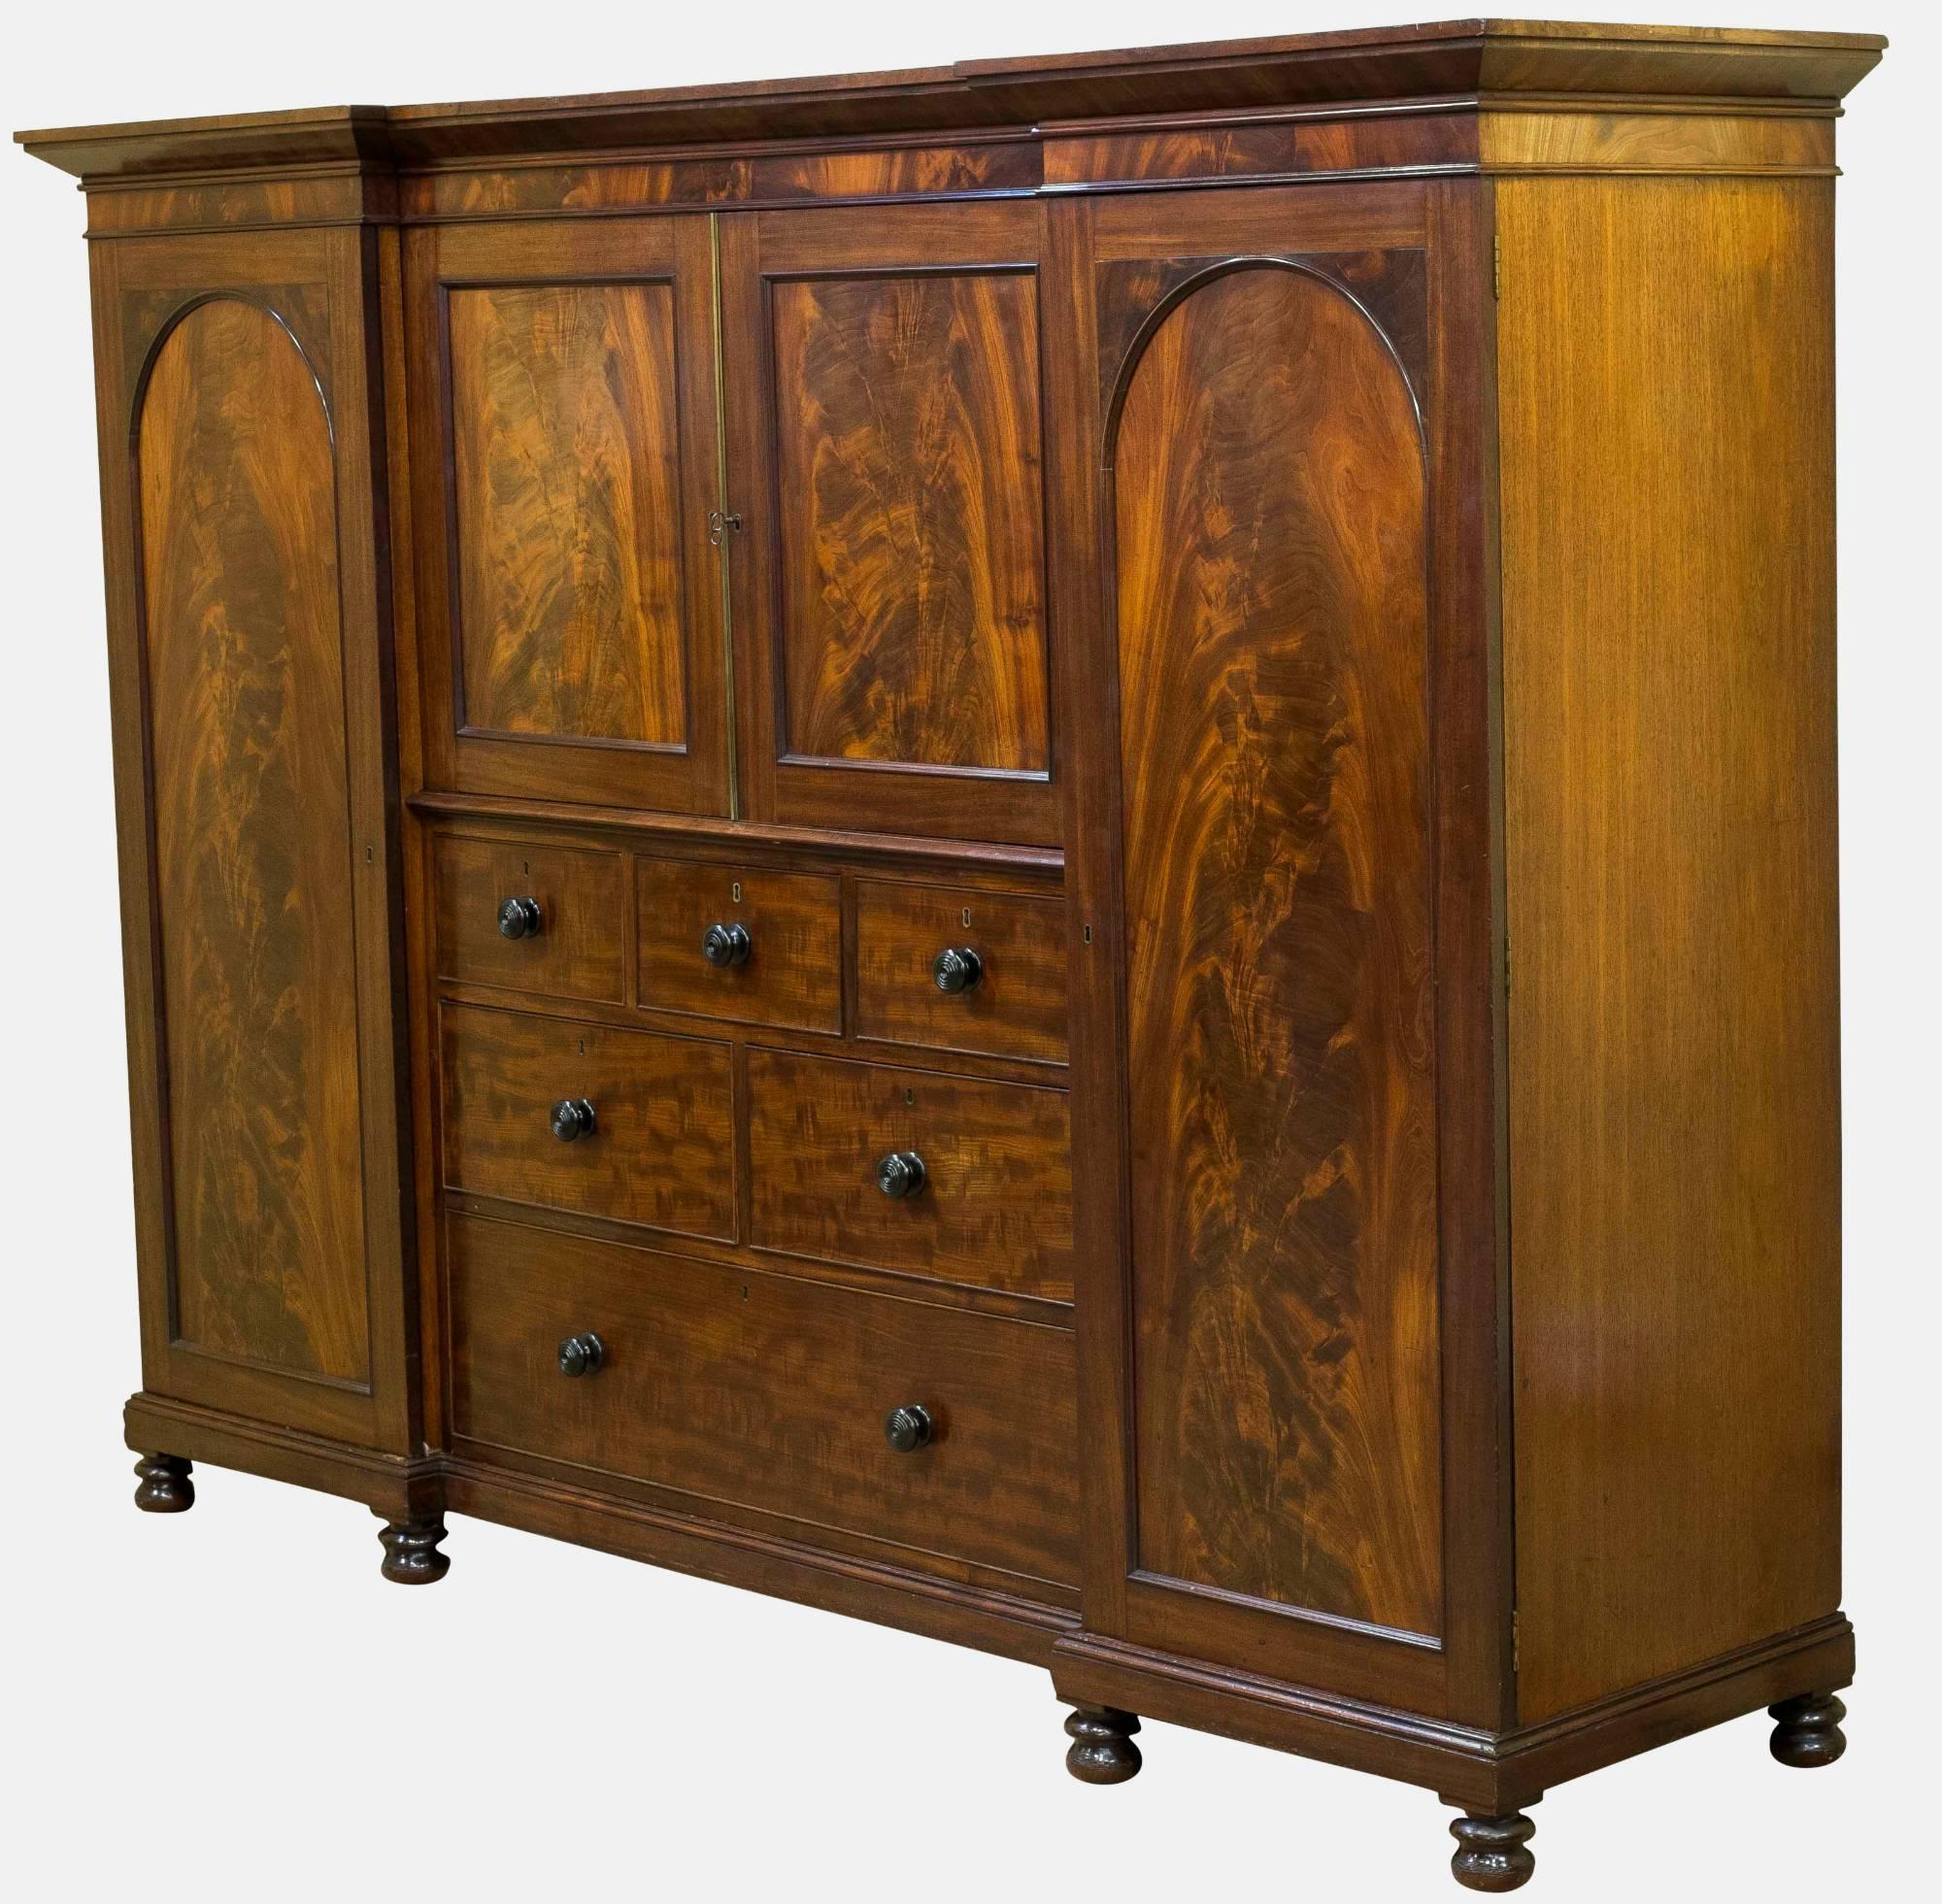 A George IV mahogany Gentleman's wardrobe/compactum of fine colour and figuring.

Drawers and slides lined in pencil cedar, original ebony handles, locks and keys.

Very compact size circa 1825